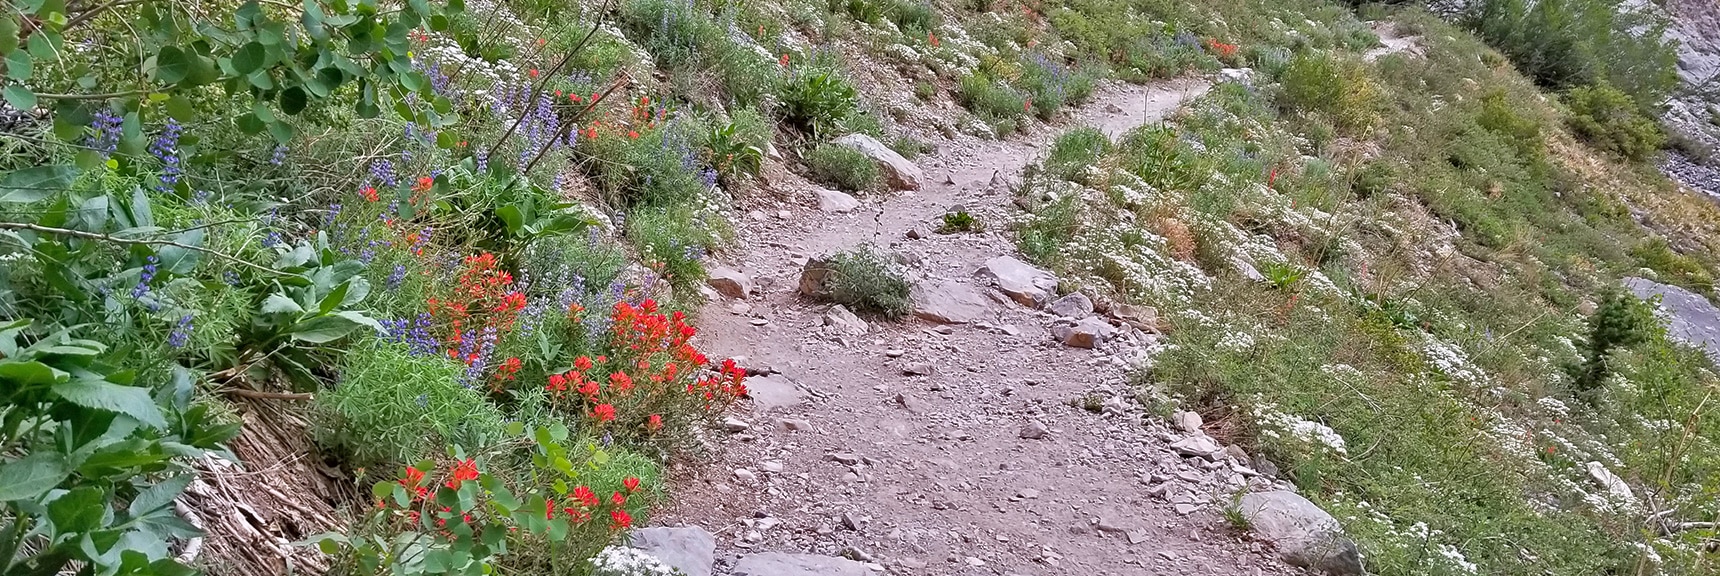 More Spring Wildflowers: Indian Paintbrush (red) Lupine (blue) | Sexton Ridge Descent from Griffith Peak, Mt. Charleston Wilderness, Spring Mountains, Nevada